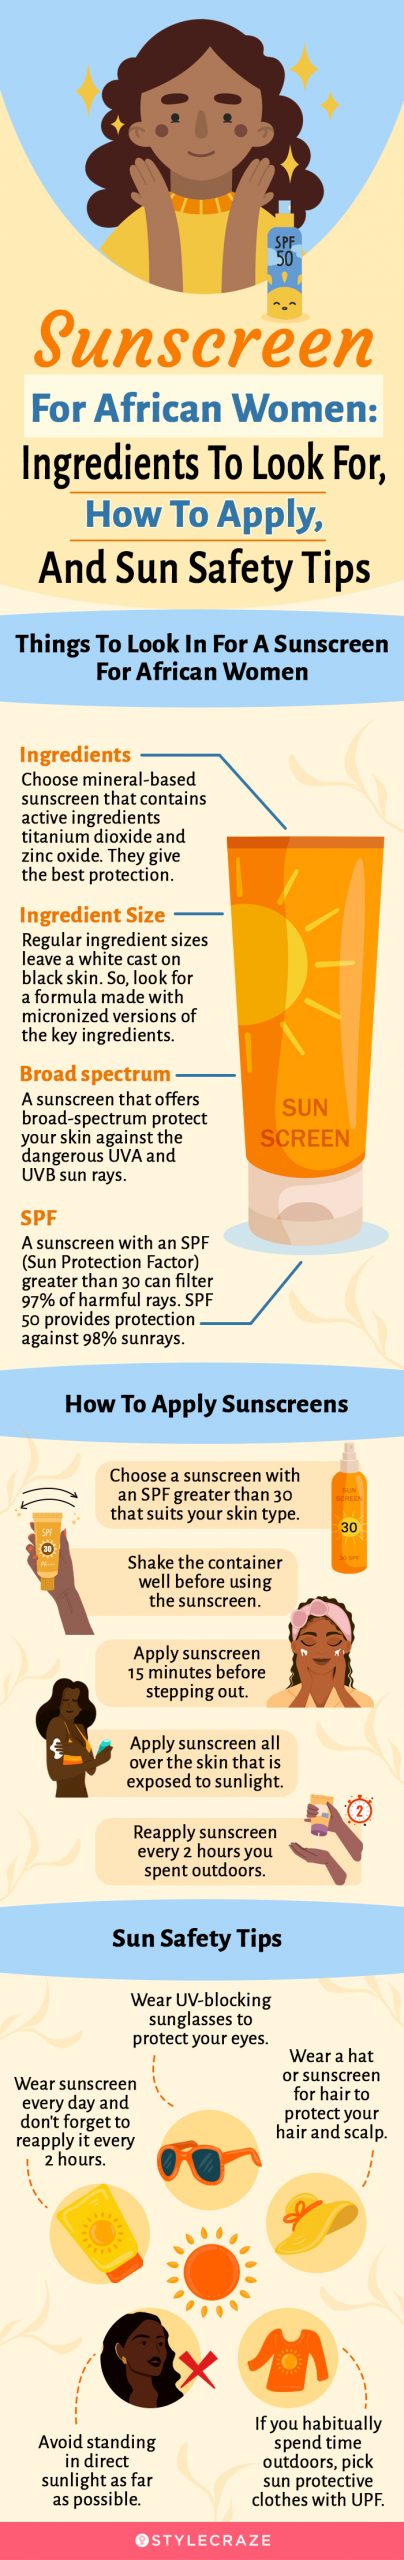 Sunscreen For African Women (infographic)